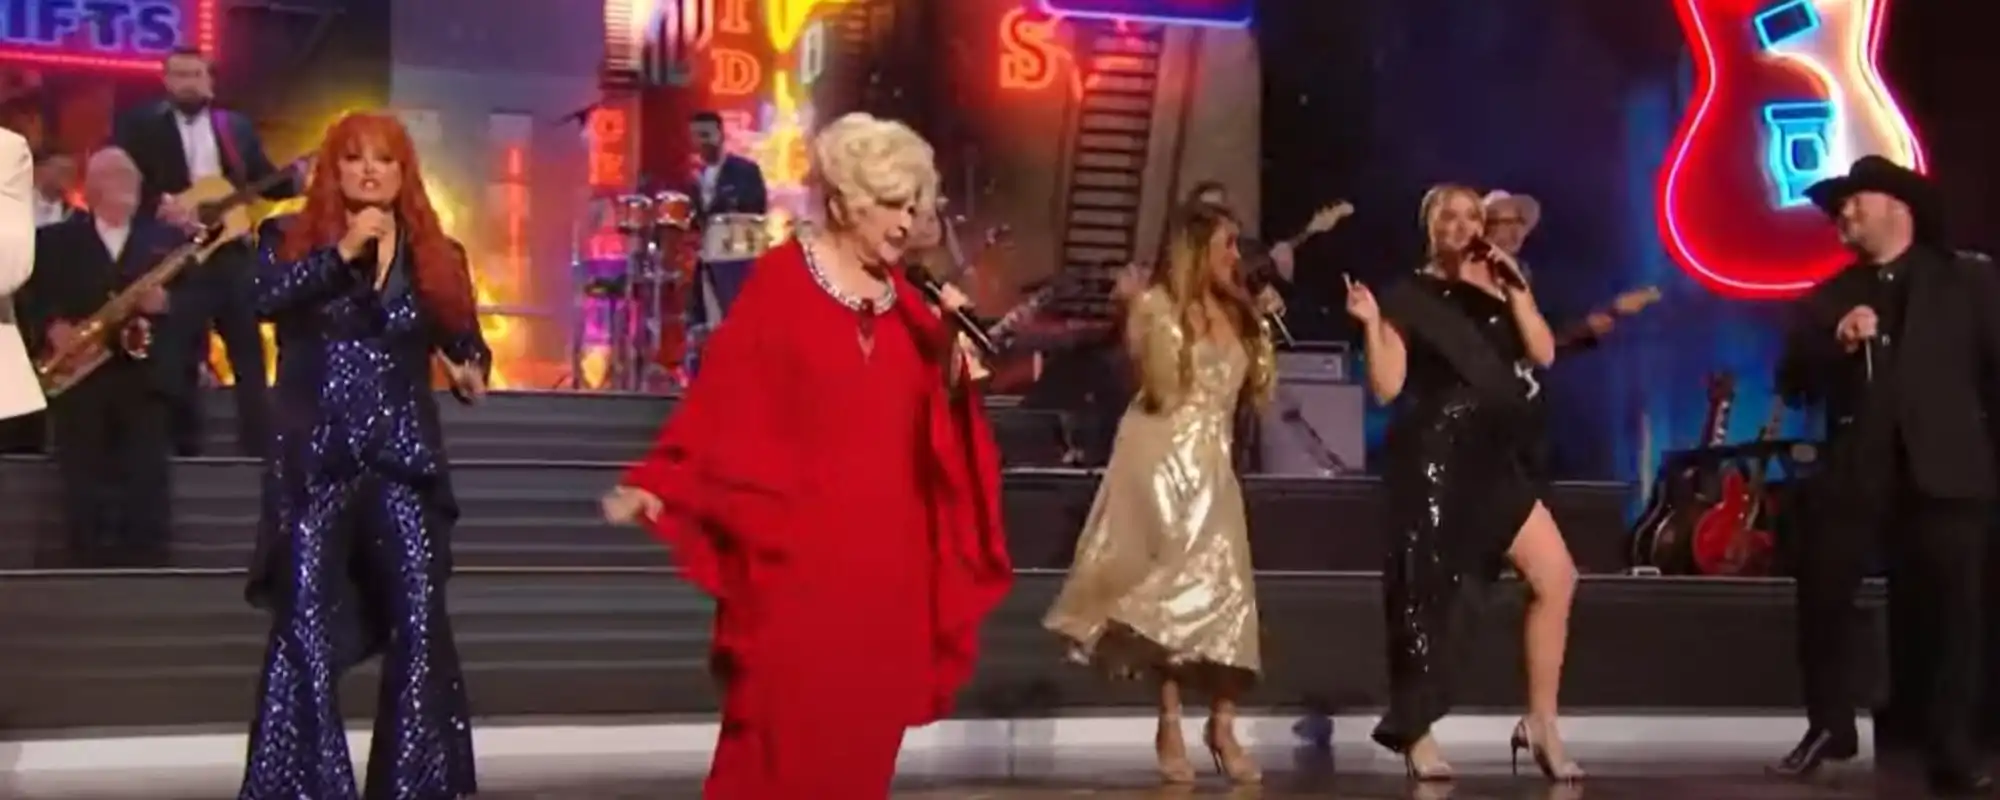 Brenda Lee performs Rockin' Around the Christmas Tree to Close Out Christmas at the Opry